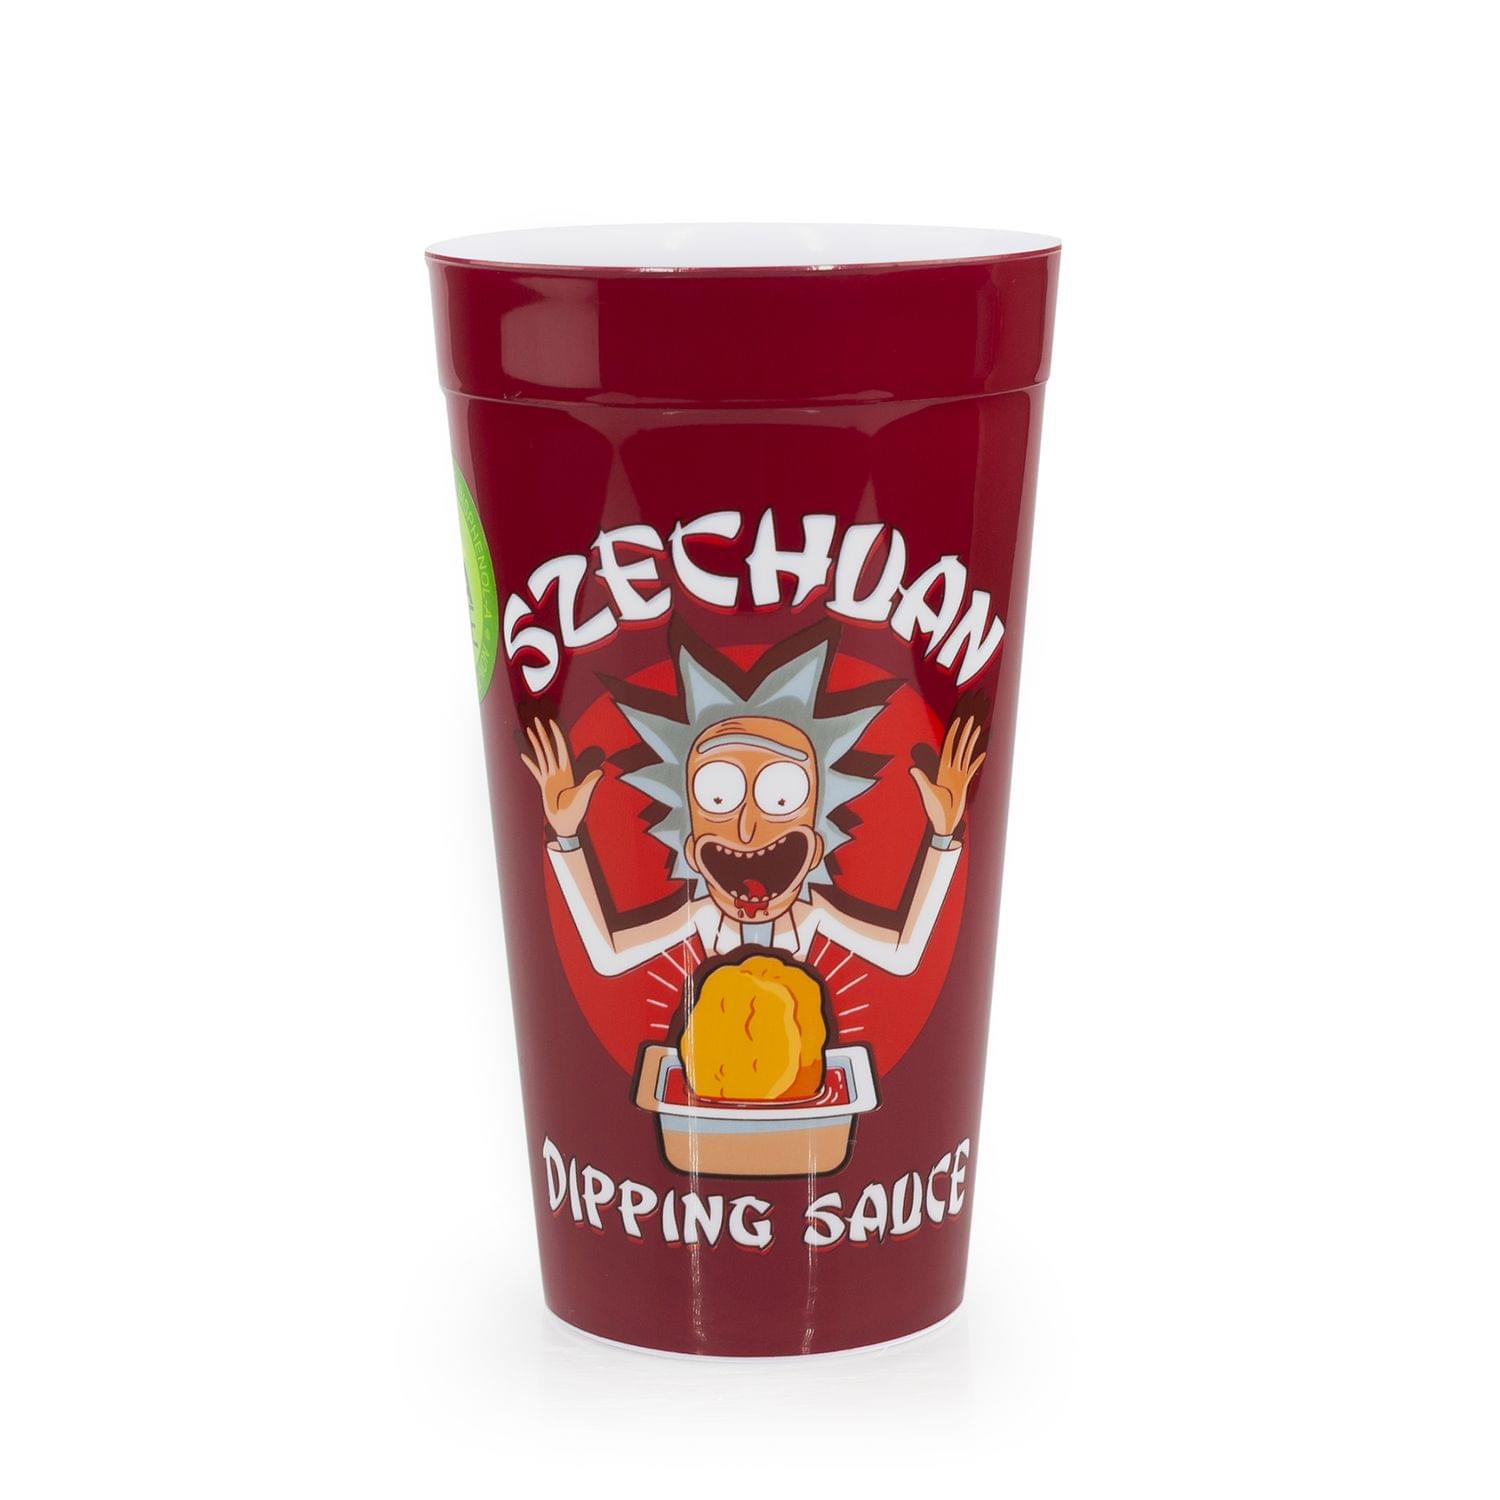 Rick and Morty Collectable Szechuan Dipping Sauce Plastic Cup